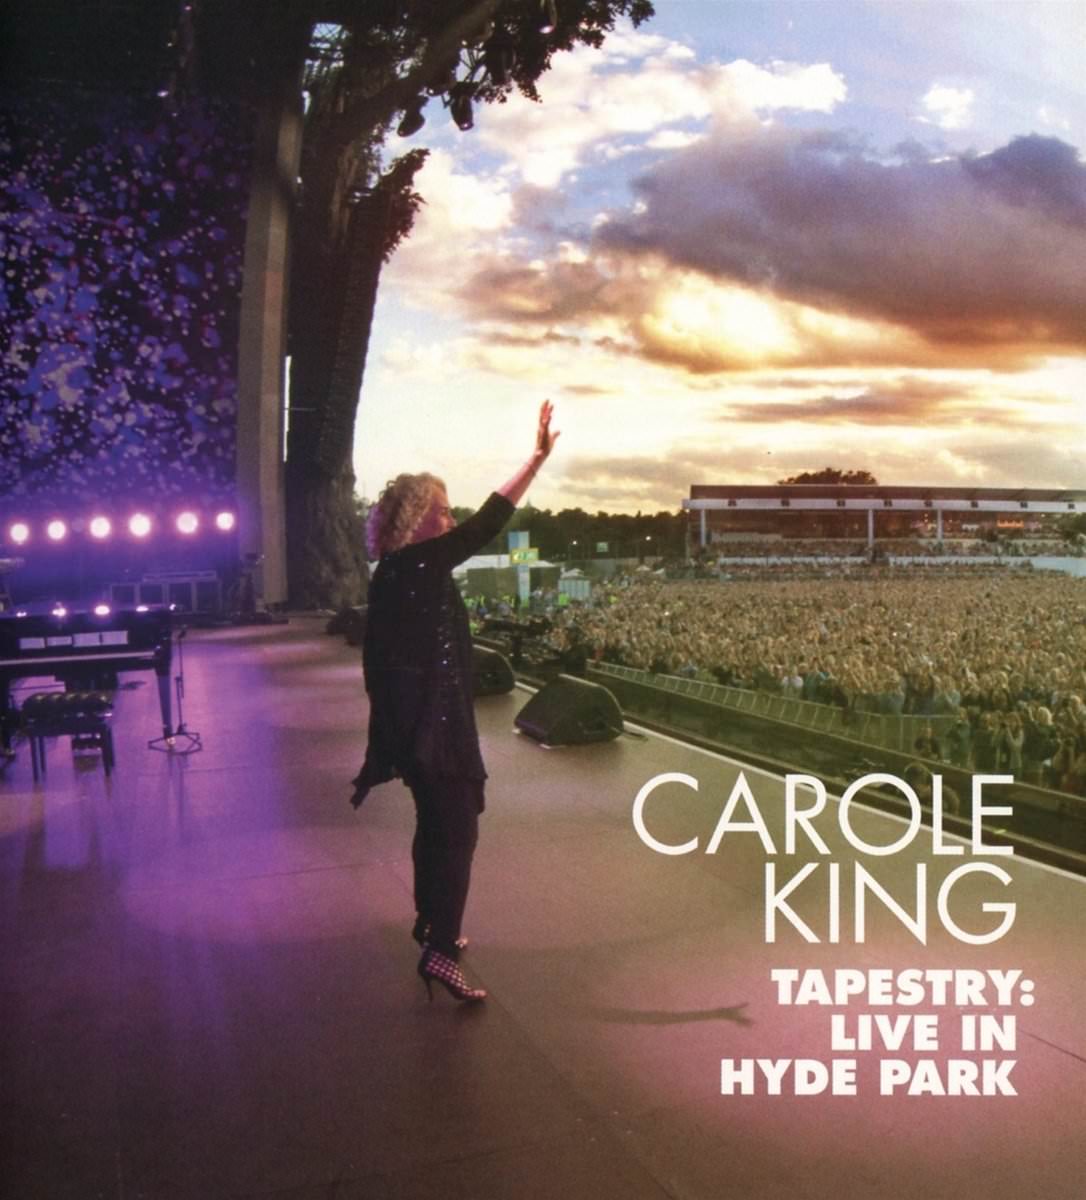 Carole King - Tapestry: Live in Hyde Park 2016 (2017) BLU-RAY 1080p LPCM 2.0